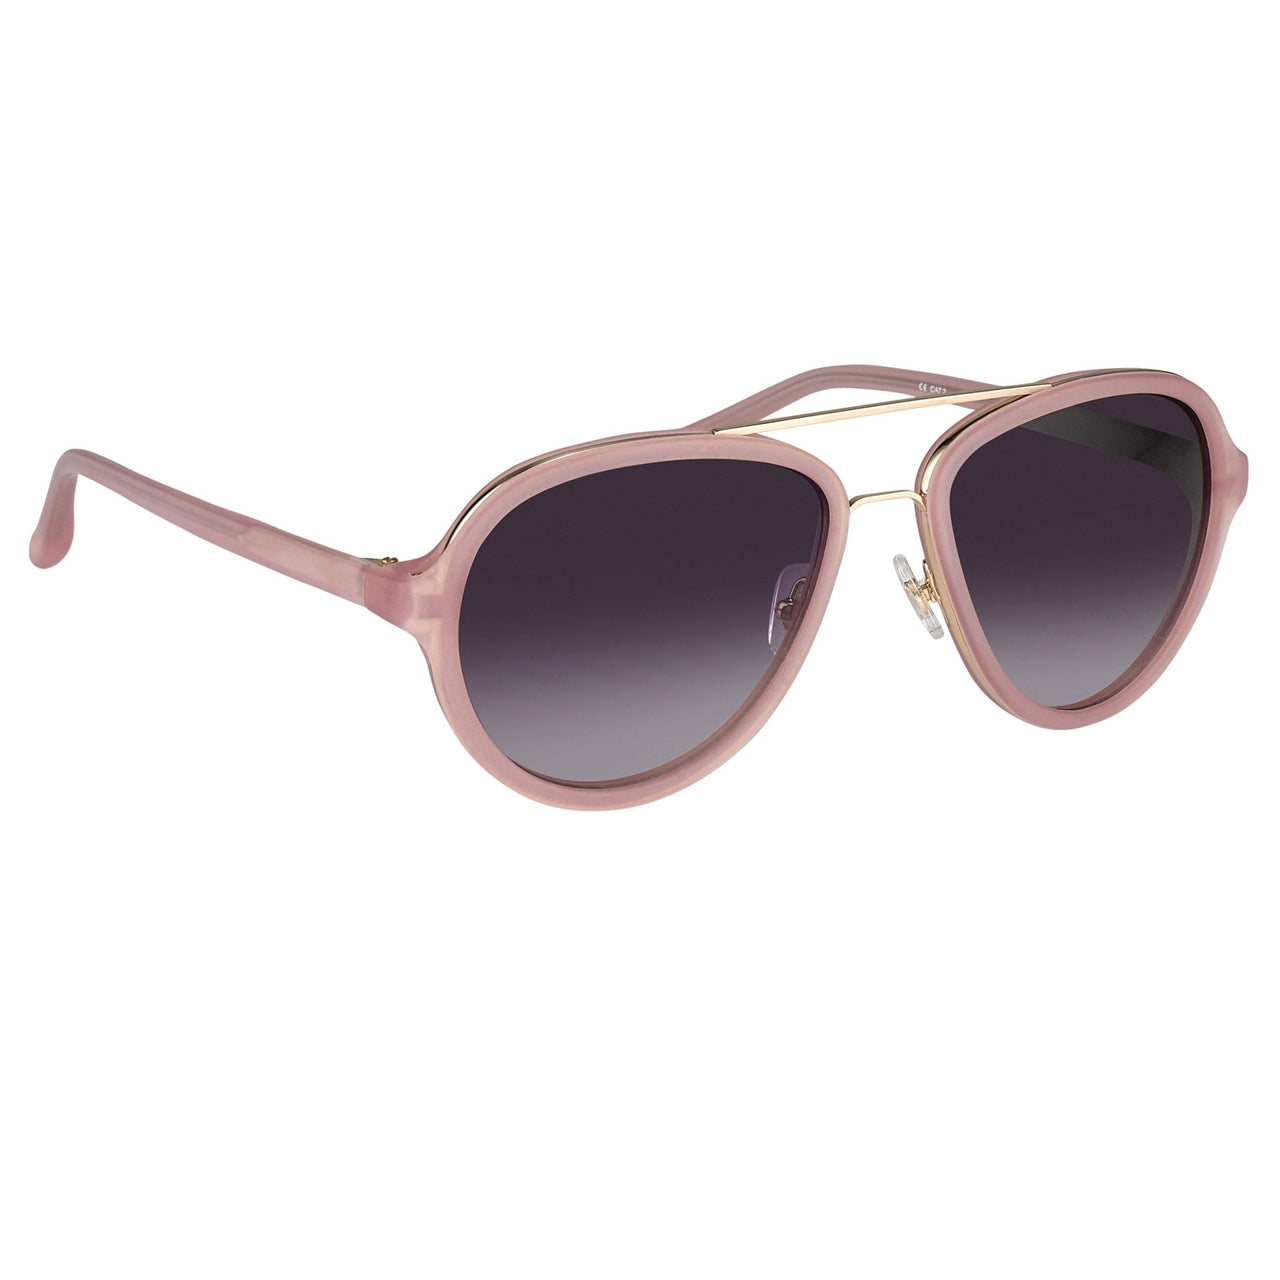 Phillip Lim Sunglasses Pink Brushed Gold and Grey Graduated Lenses Category 3 - PL16C15SUN - Watches & Crystals